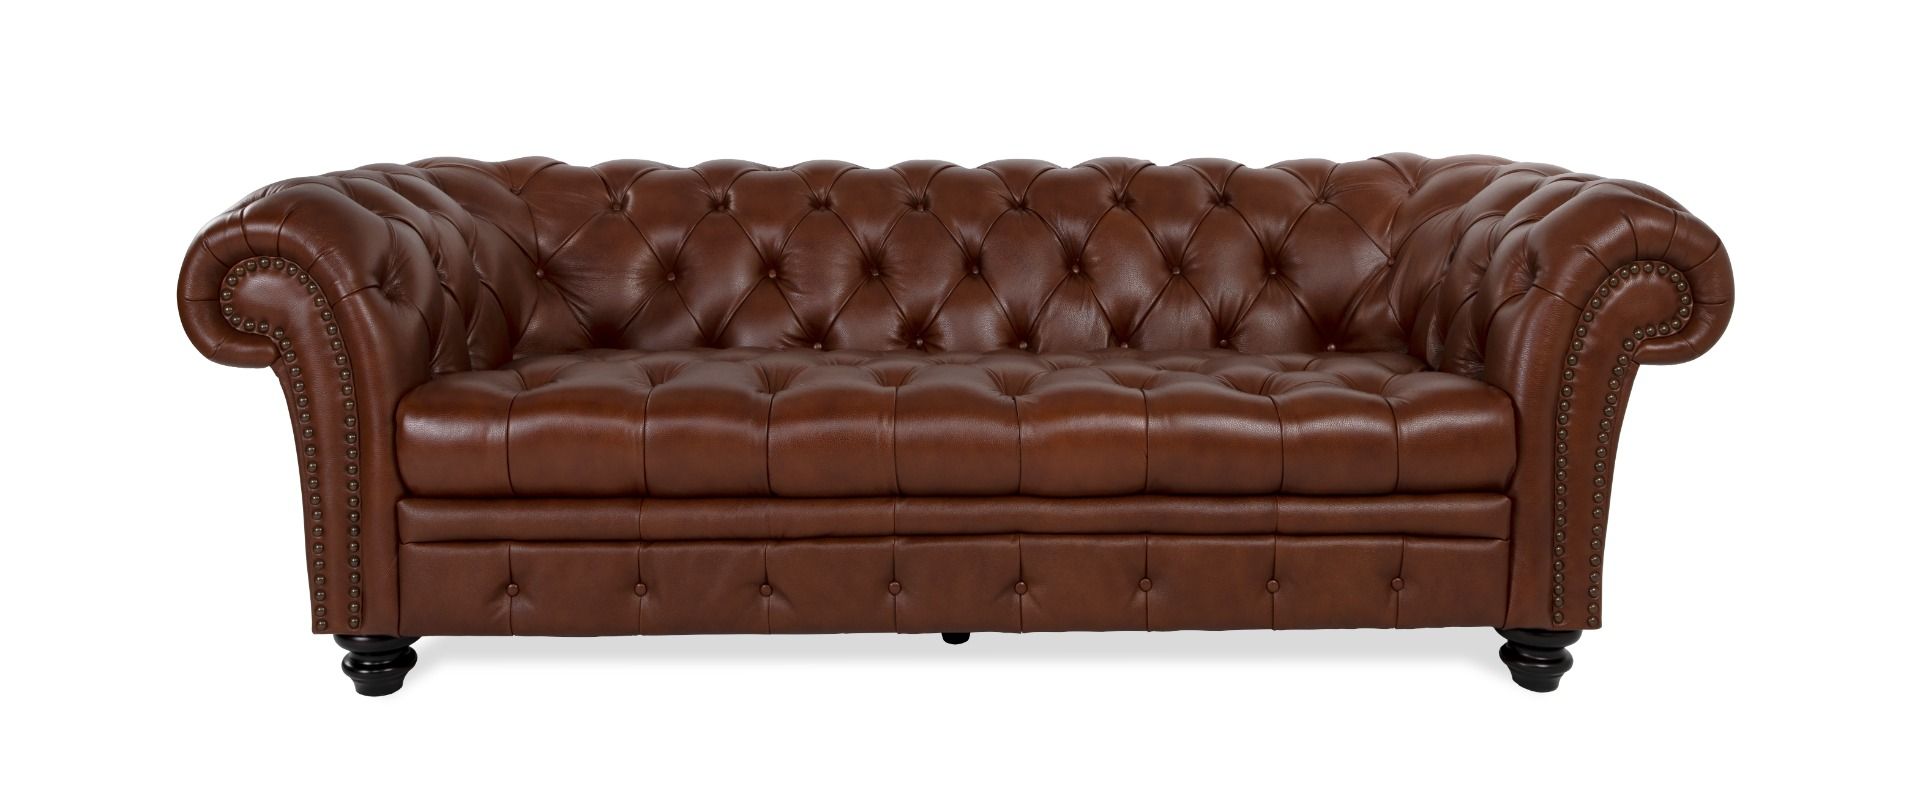 Harlow Brown Leather Chesterfield 2